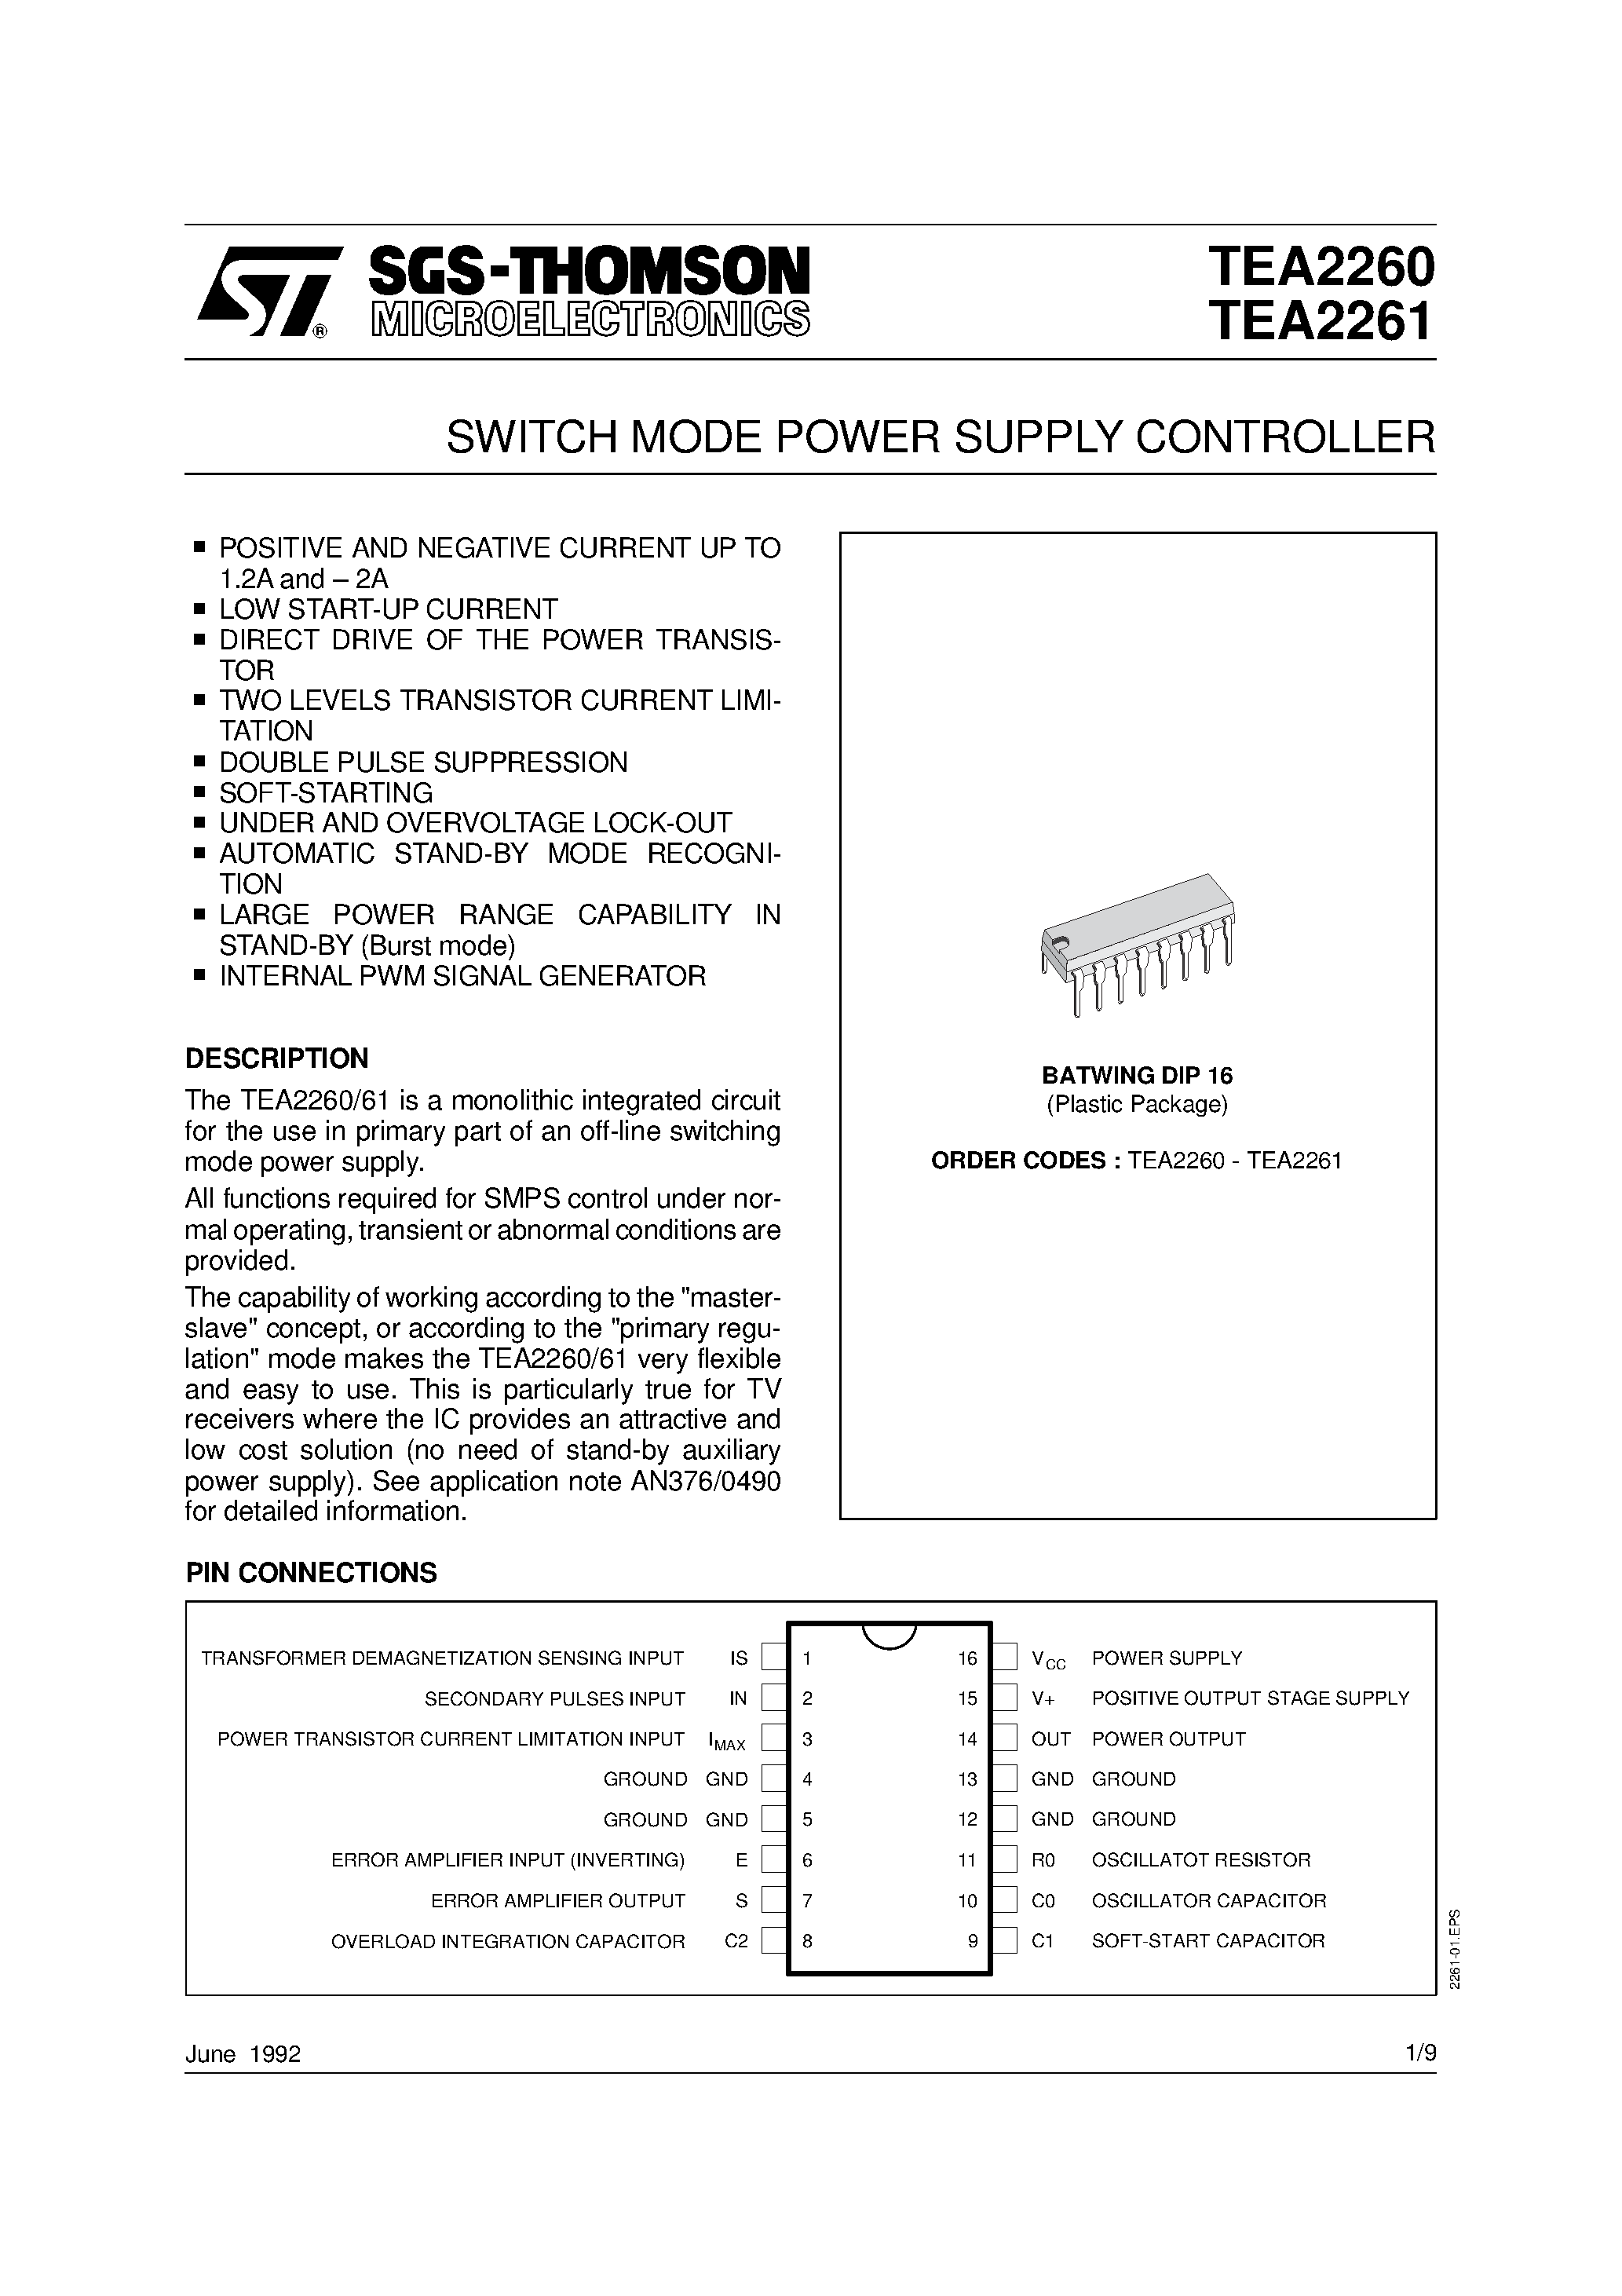 Datasheet TEA-2261 - SWITCH MODE POWER SUPPLY CONTROLLER page 1